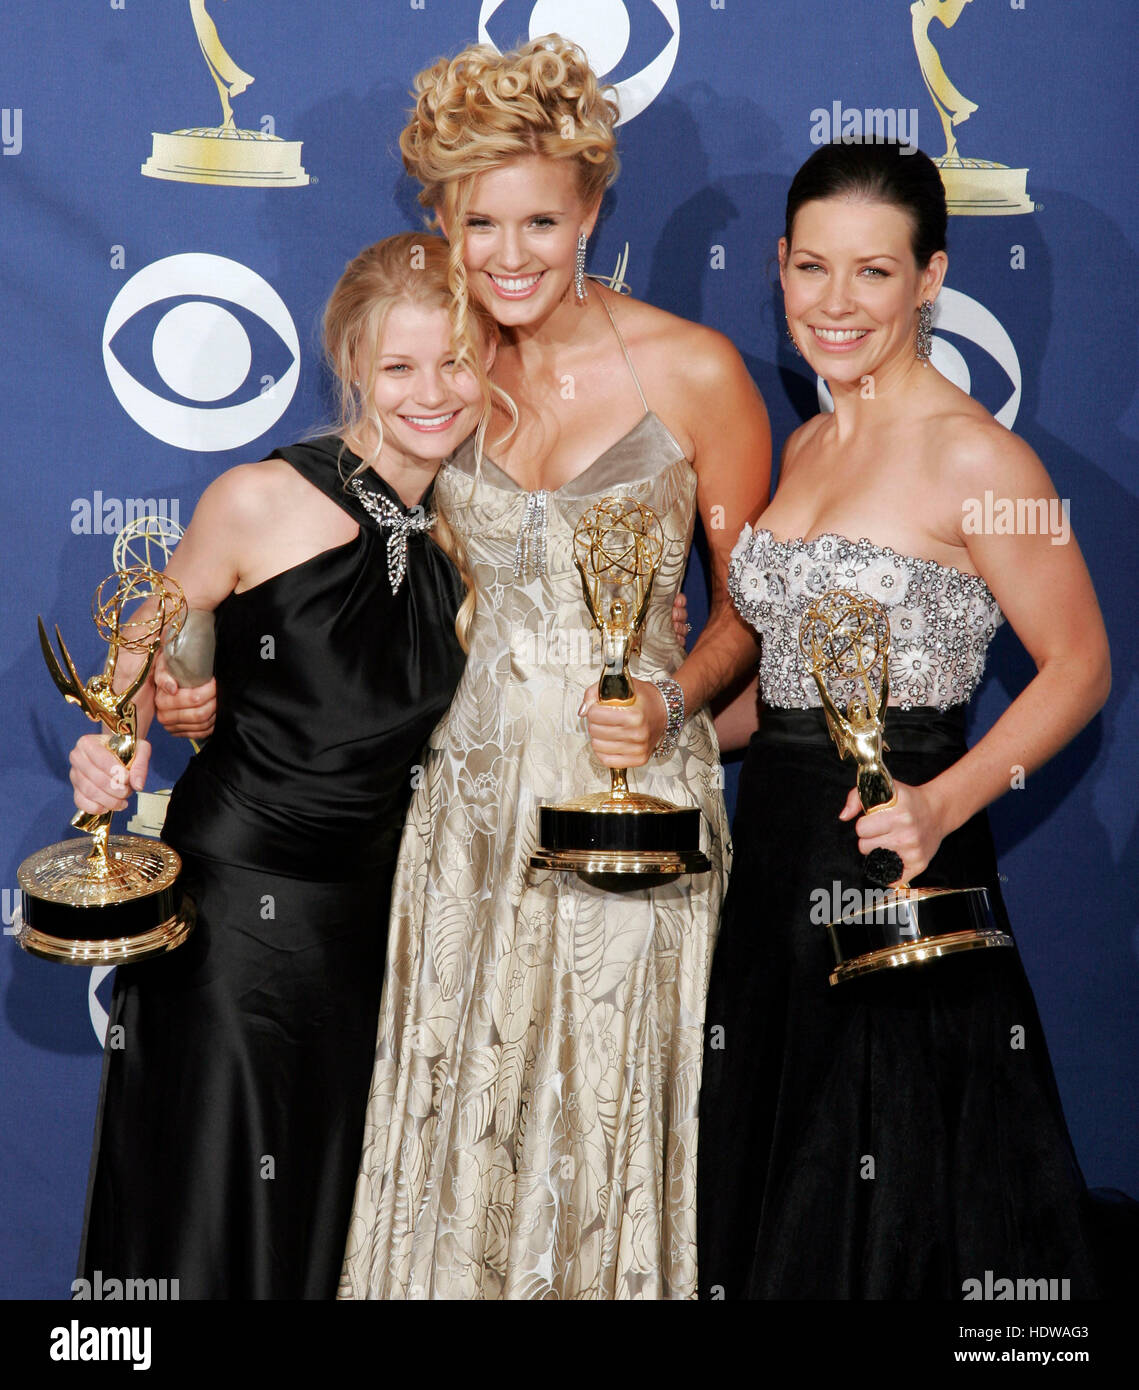 Emilie de Ravin, Maggie Grace, and Evangeline Lilly, from the cast of 'Lost', winner of best drama at the 57th Annual Emmy Awards at the Shrine Auditorium in Los Angeles, September 18, 2005. Photo credit: Francis Specker Stock Photo